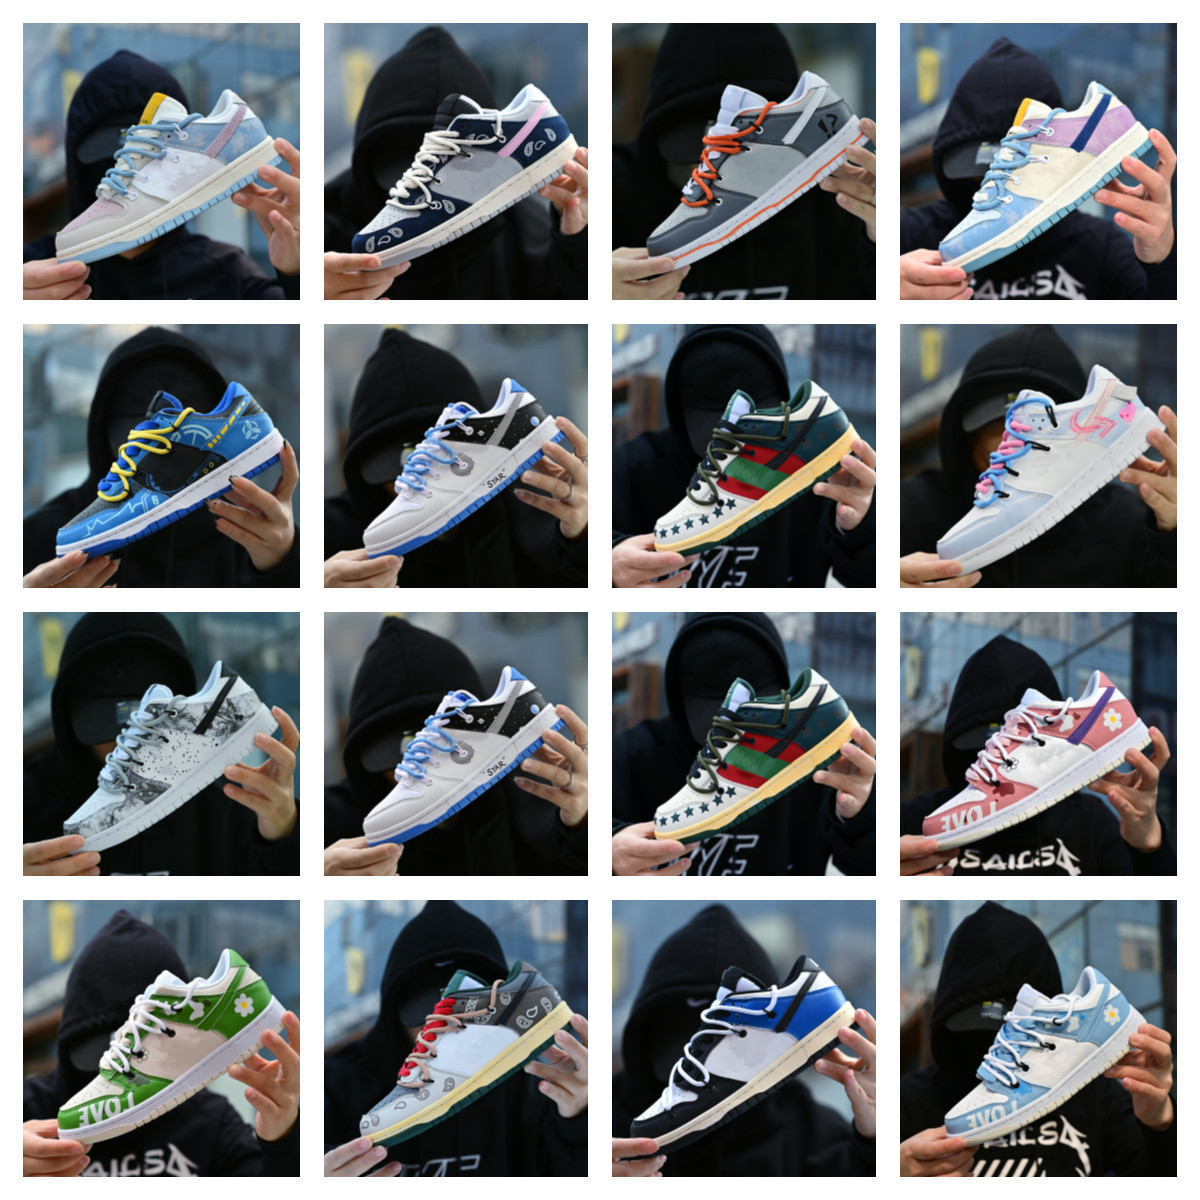 

2022 OW x Lot 1-50 of Running Shoes Designer Men Women Low pro the 50 sports dunksb Sneakers Collection Sail Black White Orange Blue OG plus SB Platform Trainers, Do not choose;other color;contact me